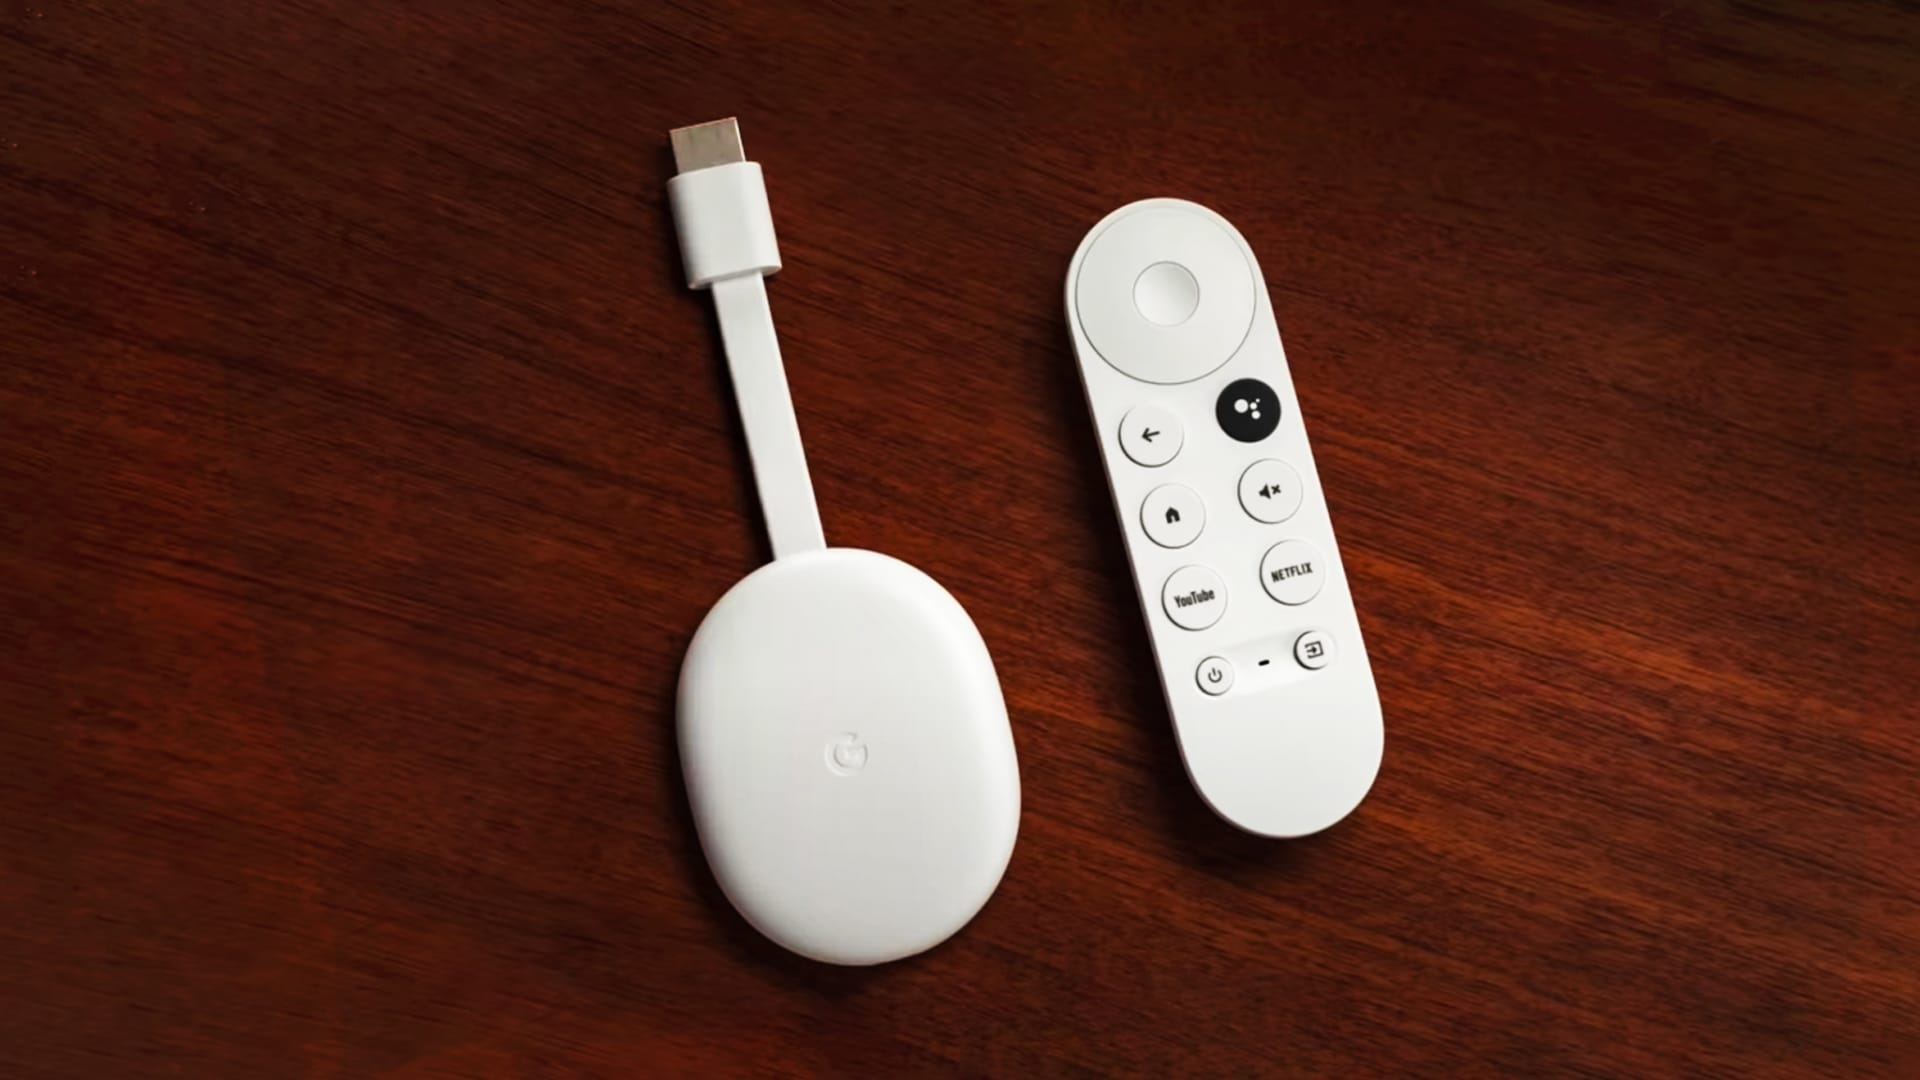 This Little Netflix Button on the New Google Chromecast Remote Shows Why the Streaming Wars Are Over